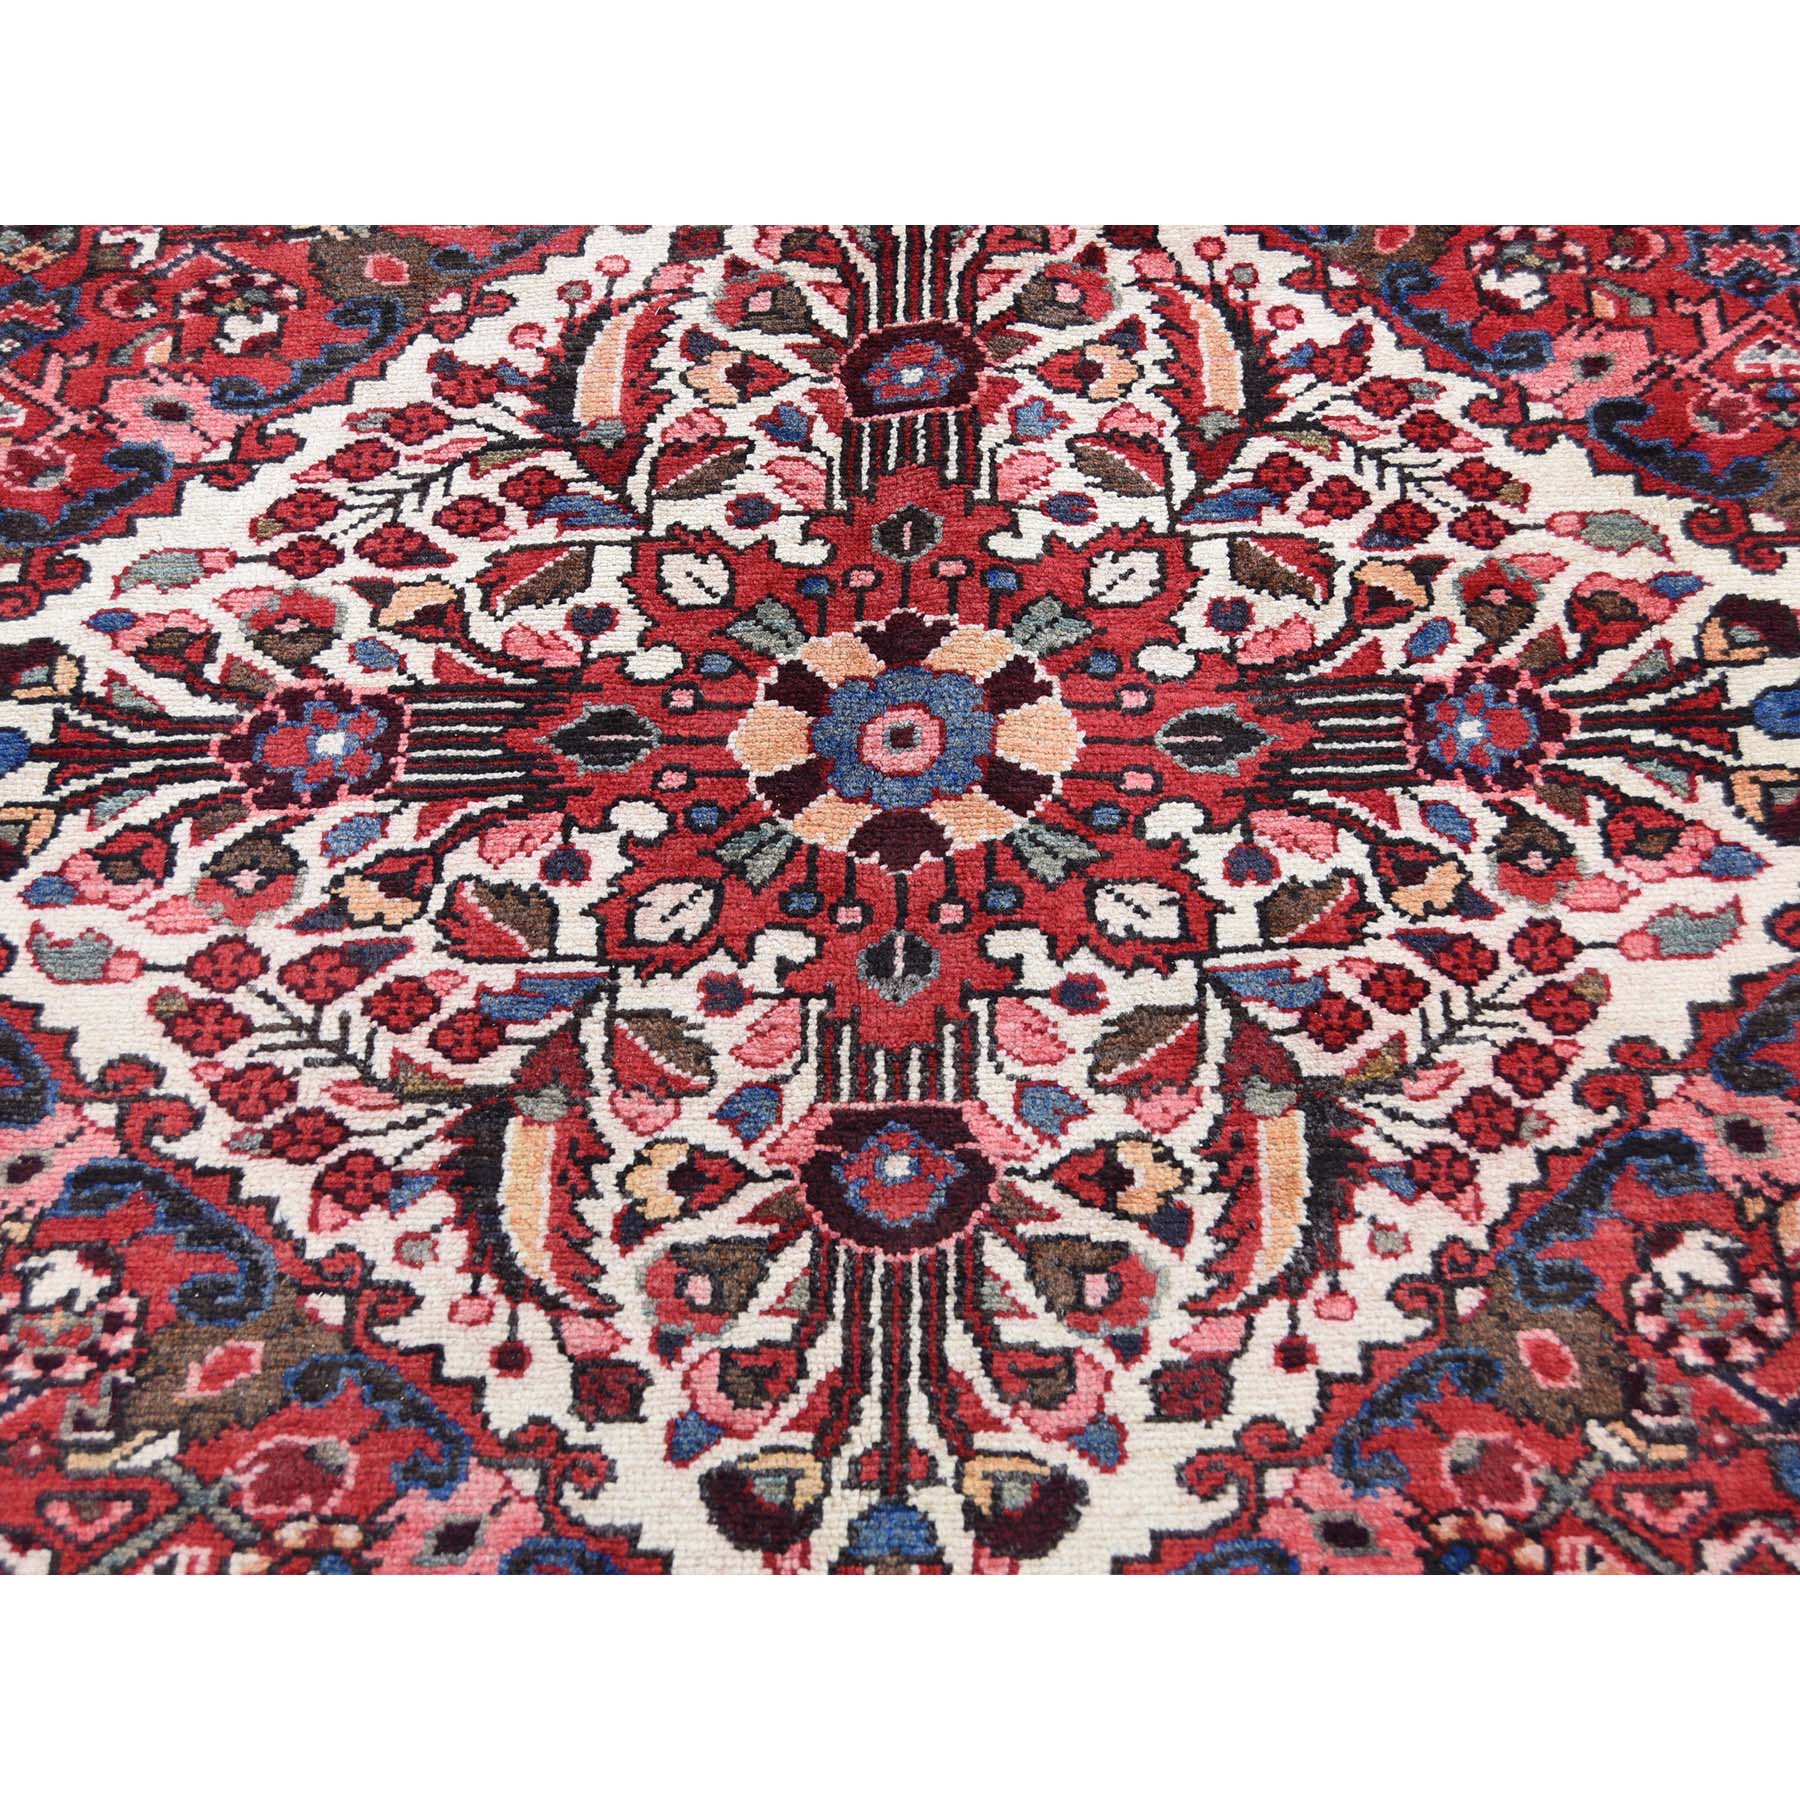 7-2 x11- Red New Persian Hussainabad Pure Wool Hand-Knotted Oriental Rug 